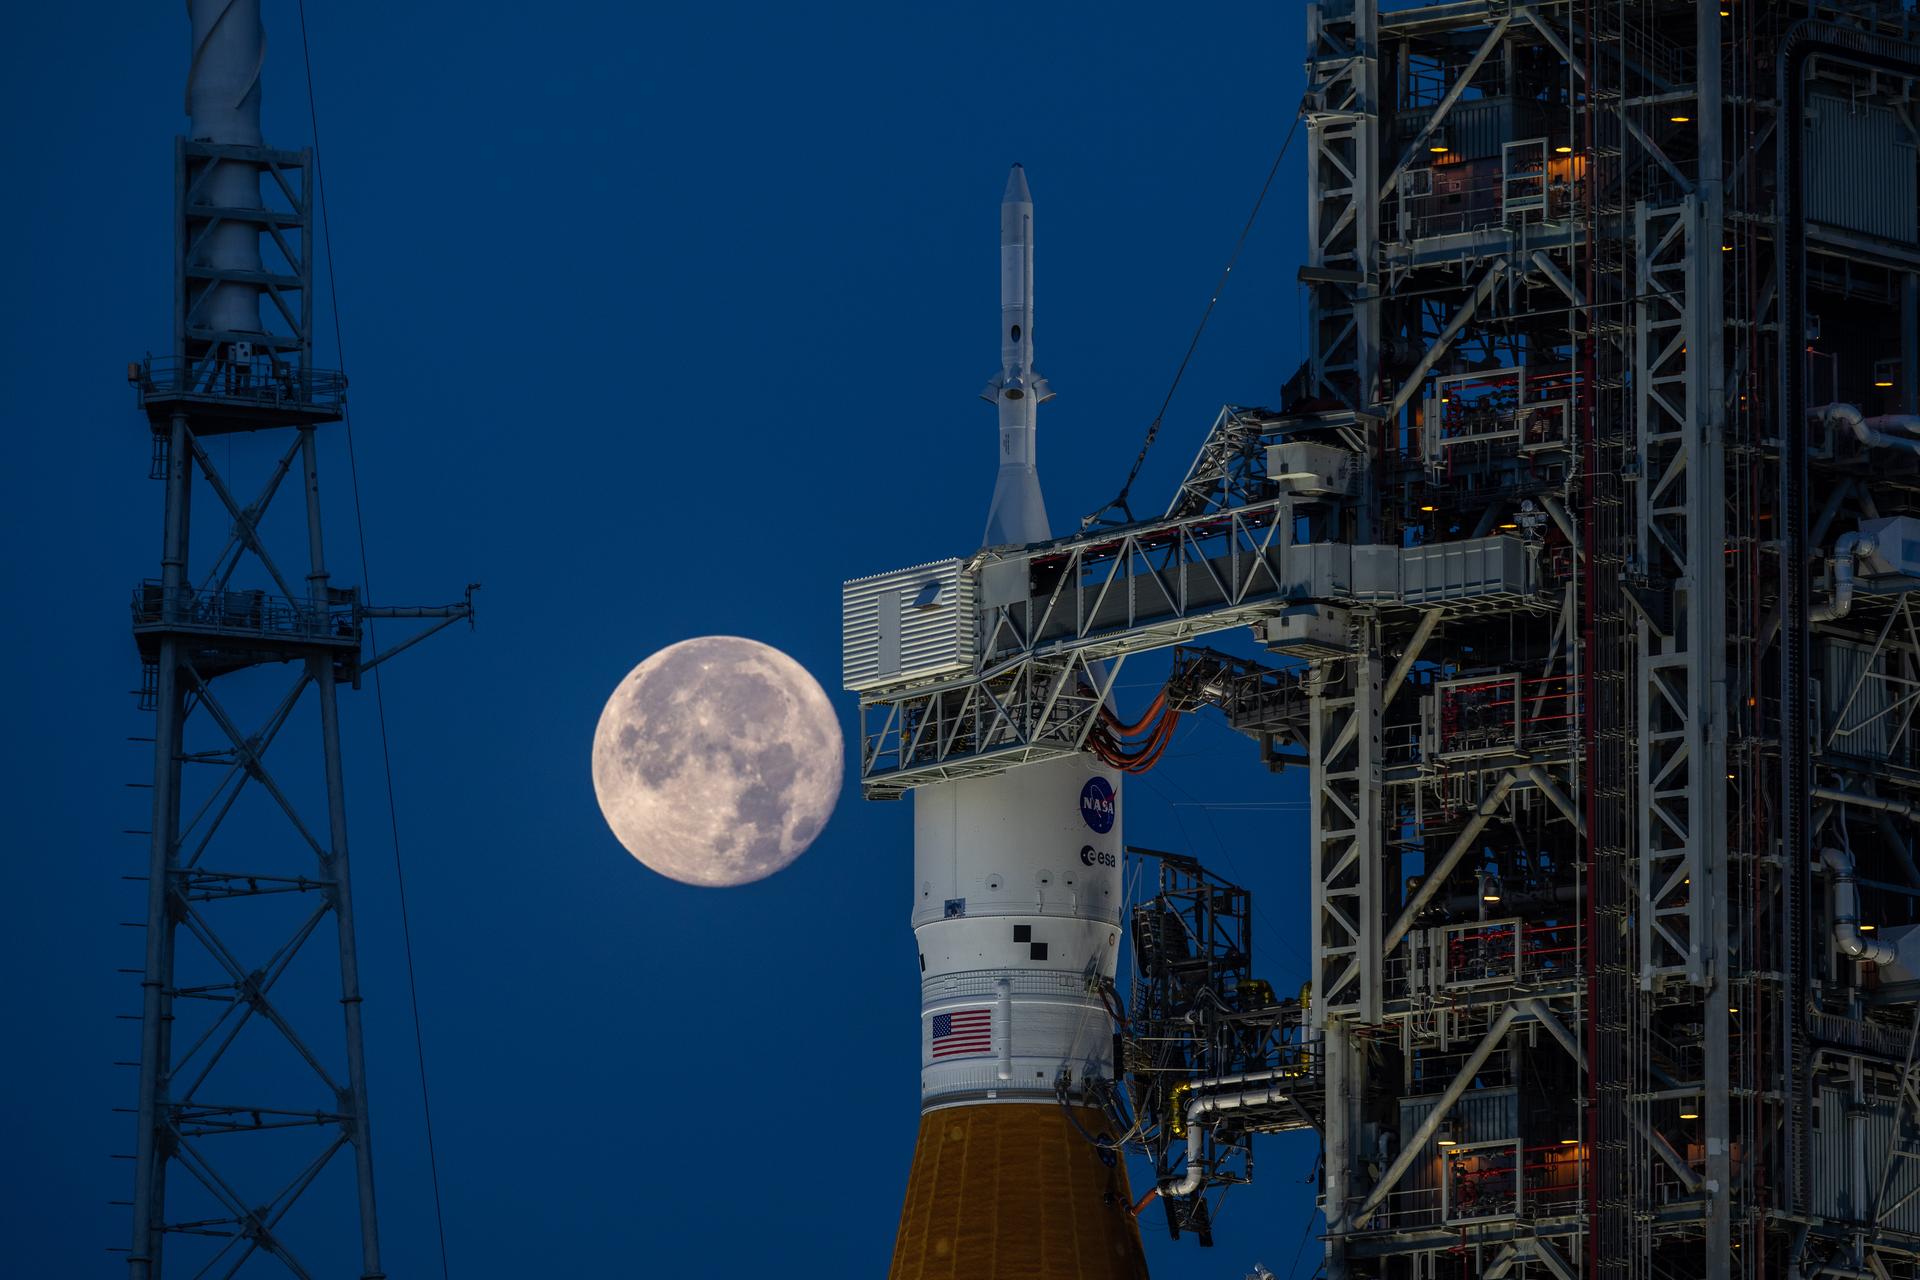 A photo shows the top of a rocket with a NASA symbol on it. Behind it is the full Moon